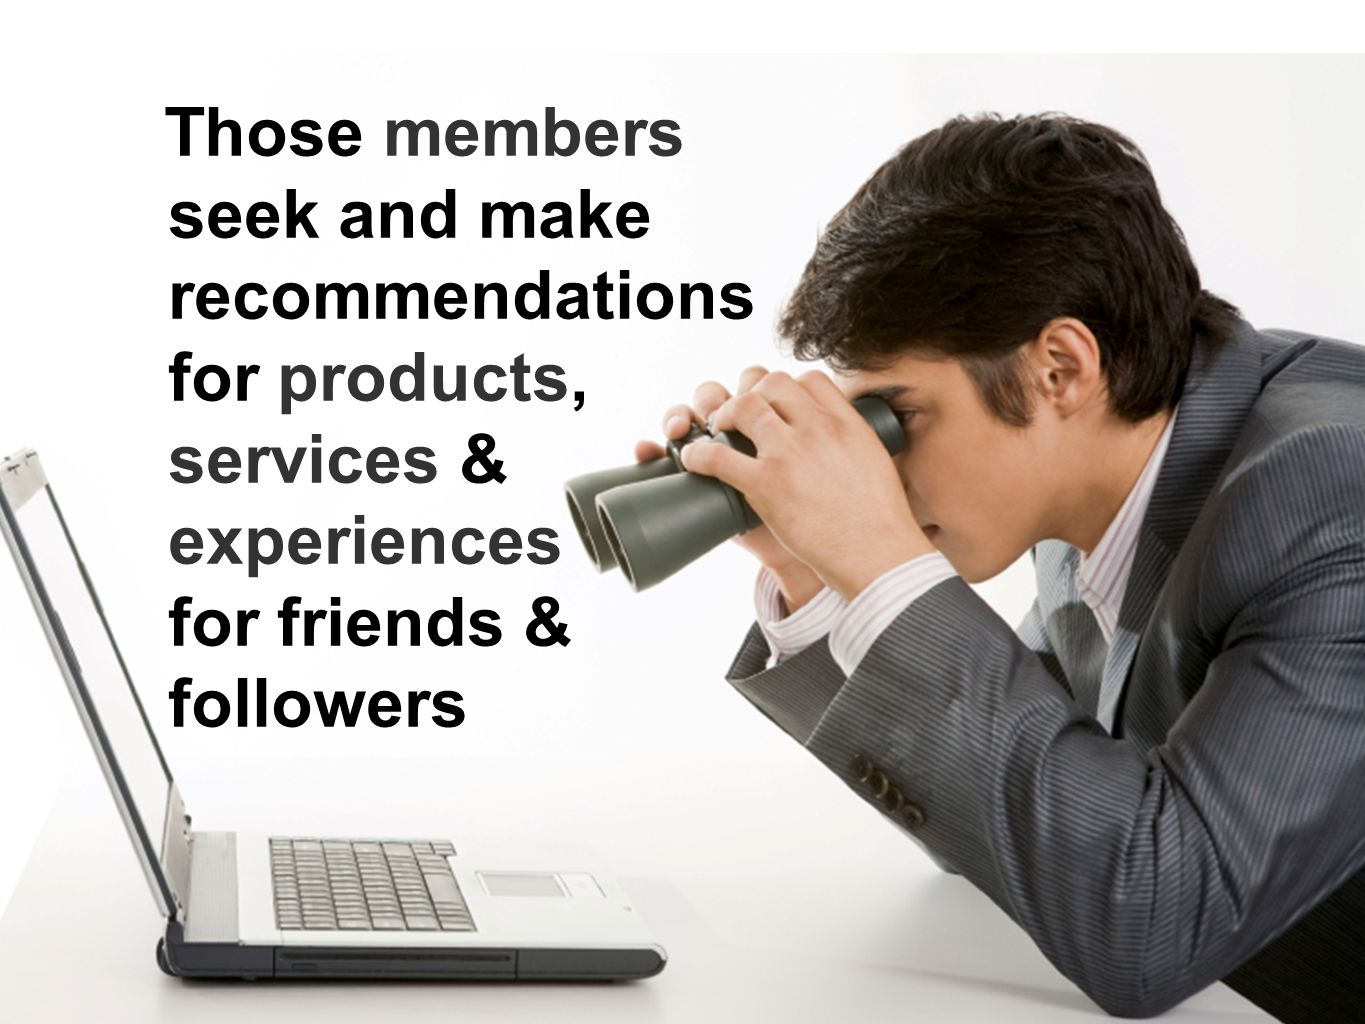 Those members seek and make recommendations for products, services & experiences for friends & followers